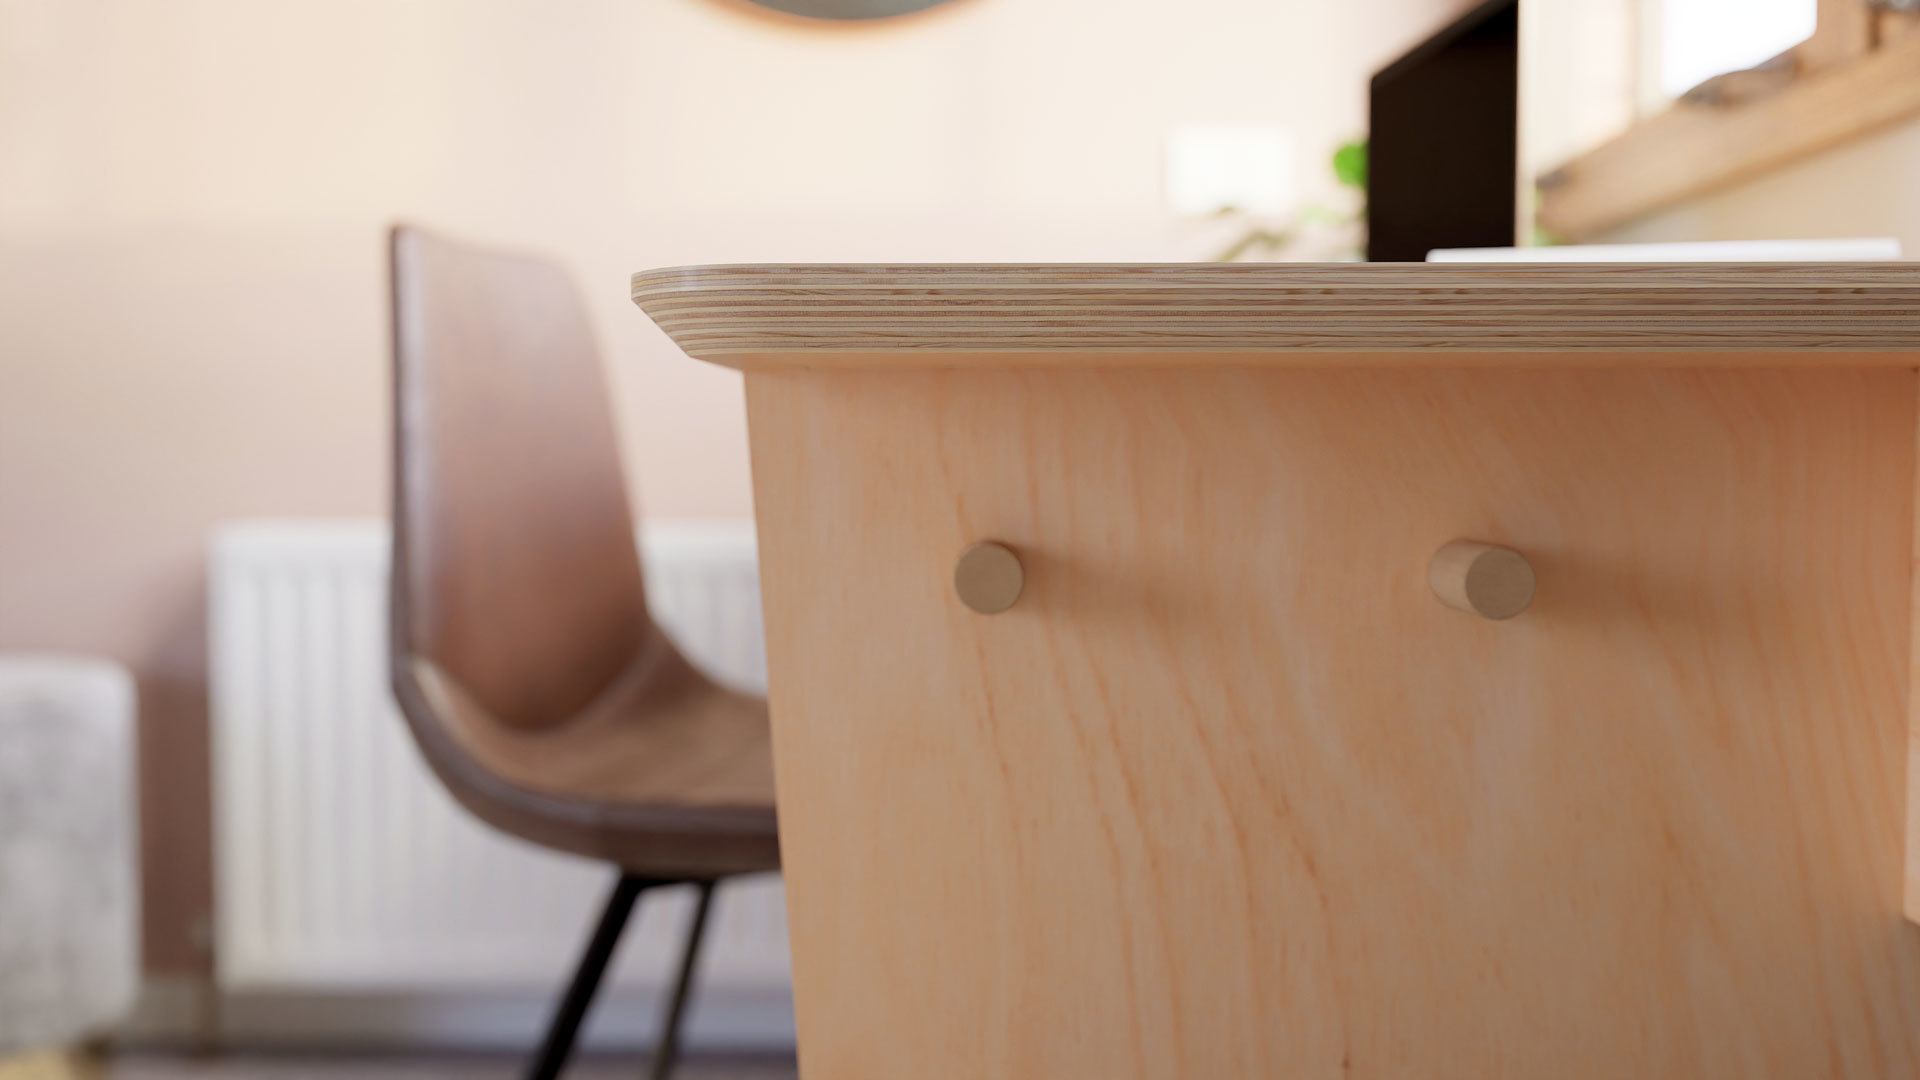 A closeup of the side of the sustainable Australian made Small Desk by Ecosium showing the strength of the timber used